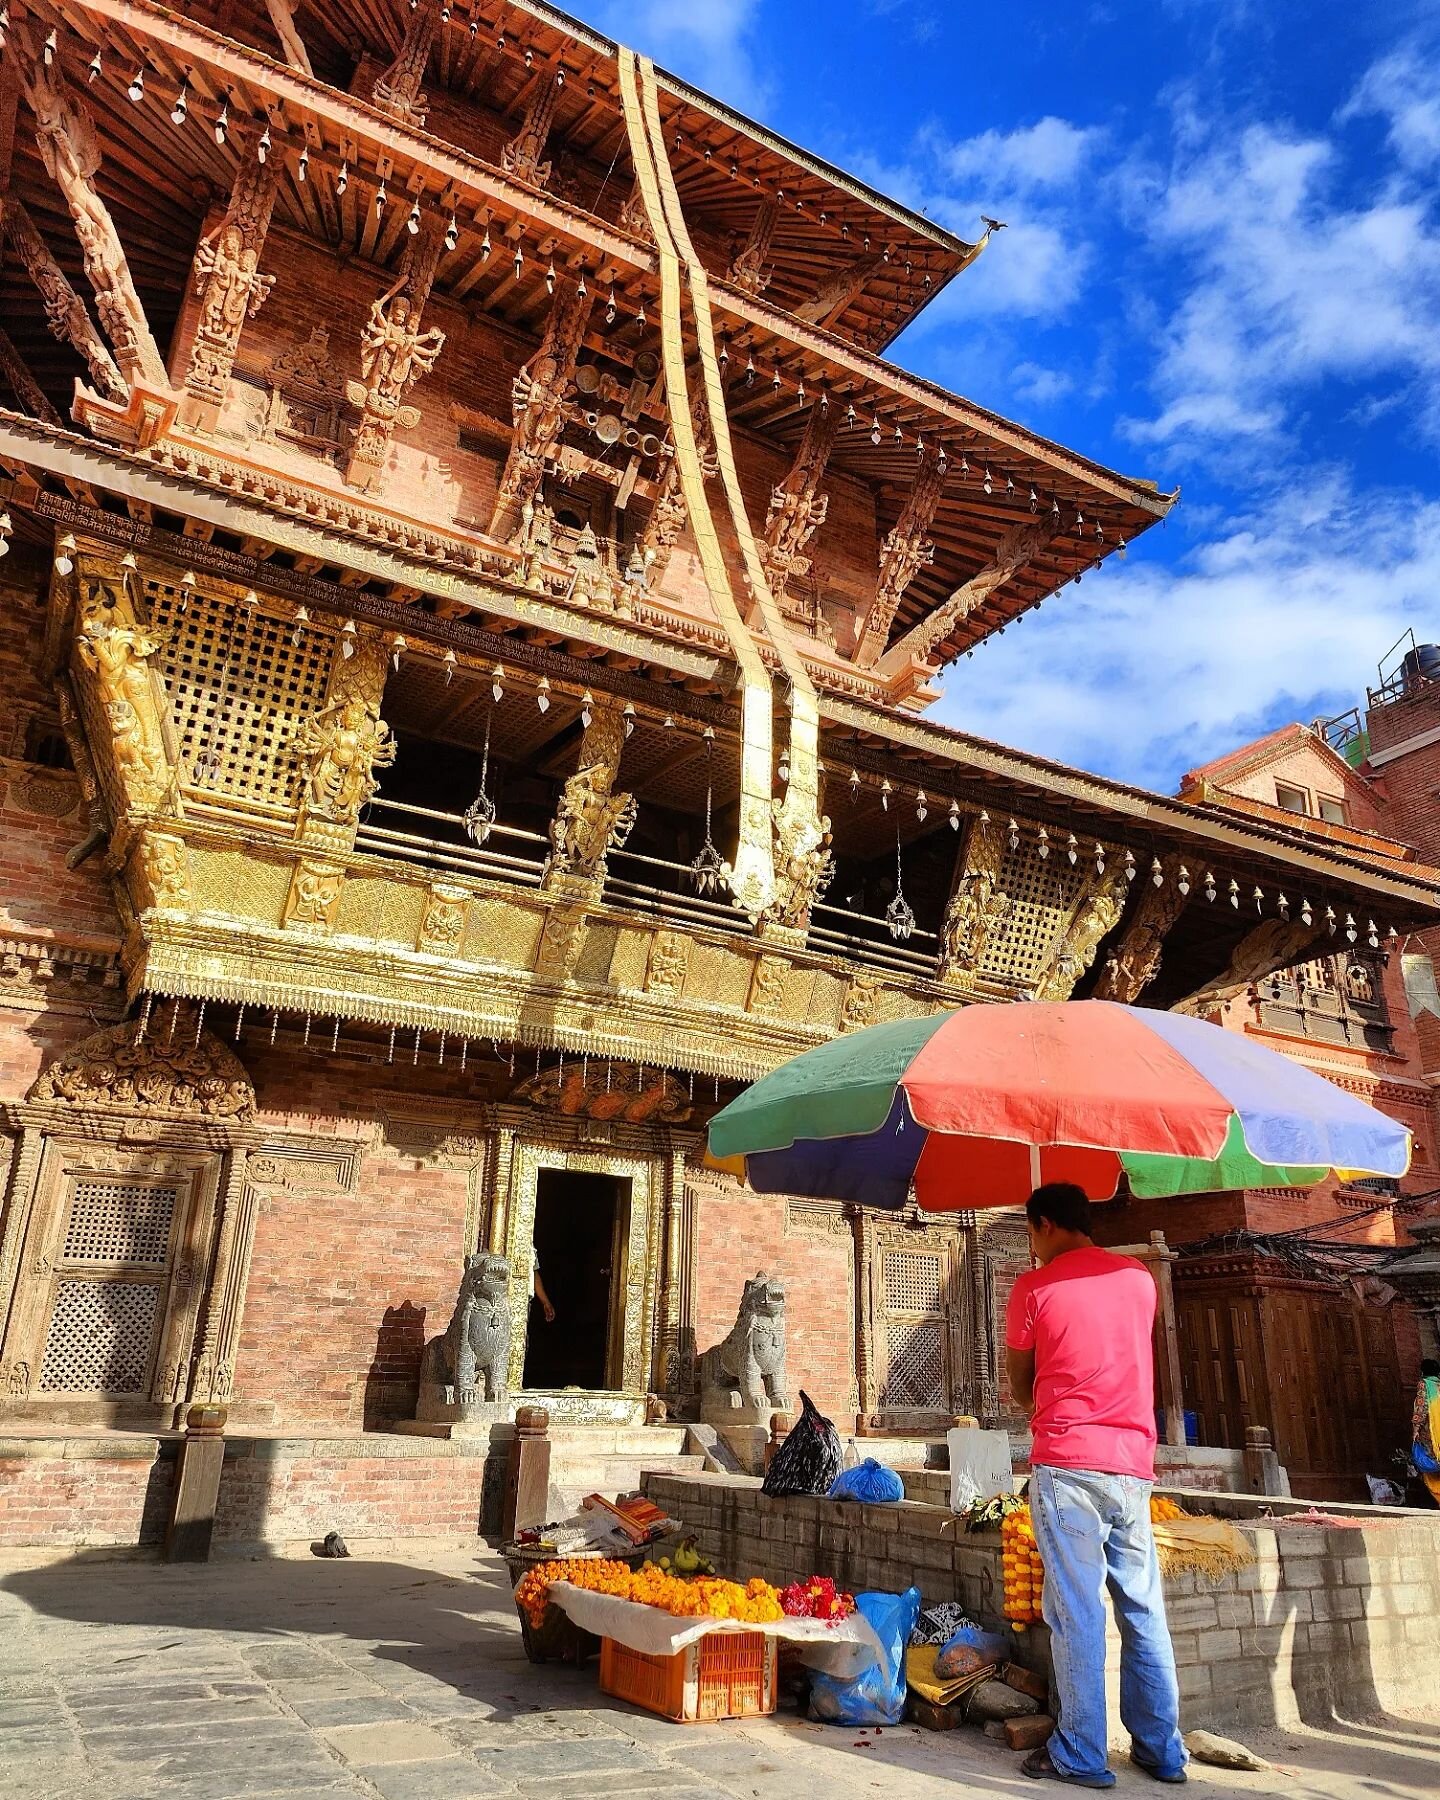 Why not staying at Cosy in historical center of Patan and experience such beautiful scenes ? &hearts;️ This picture was taken this morning in Patan Durbar Square, in front of the recently renovated Bhimsen temple 😊
------
#cosynepal #cosynepalsurrou